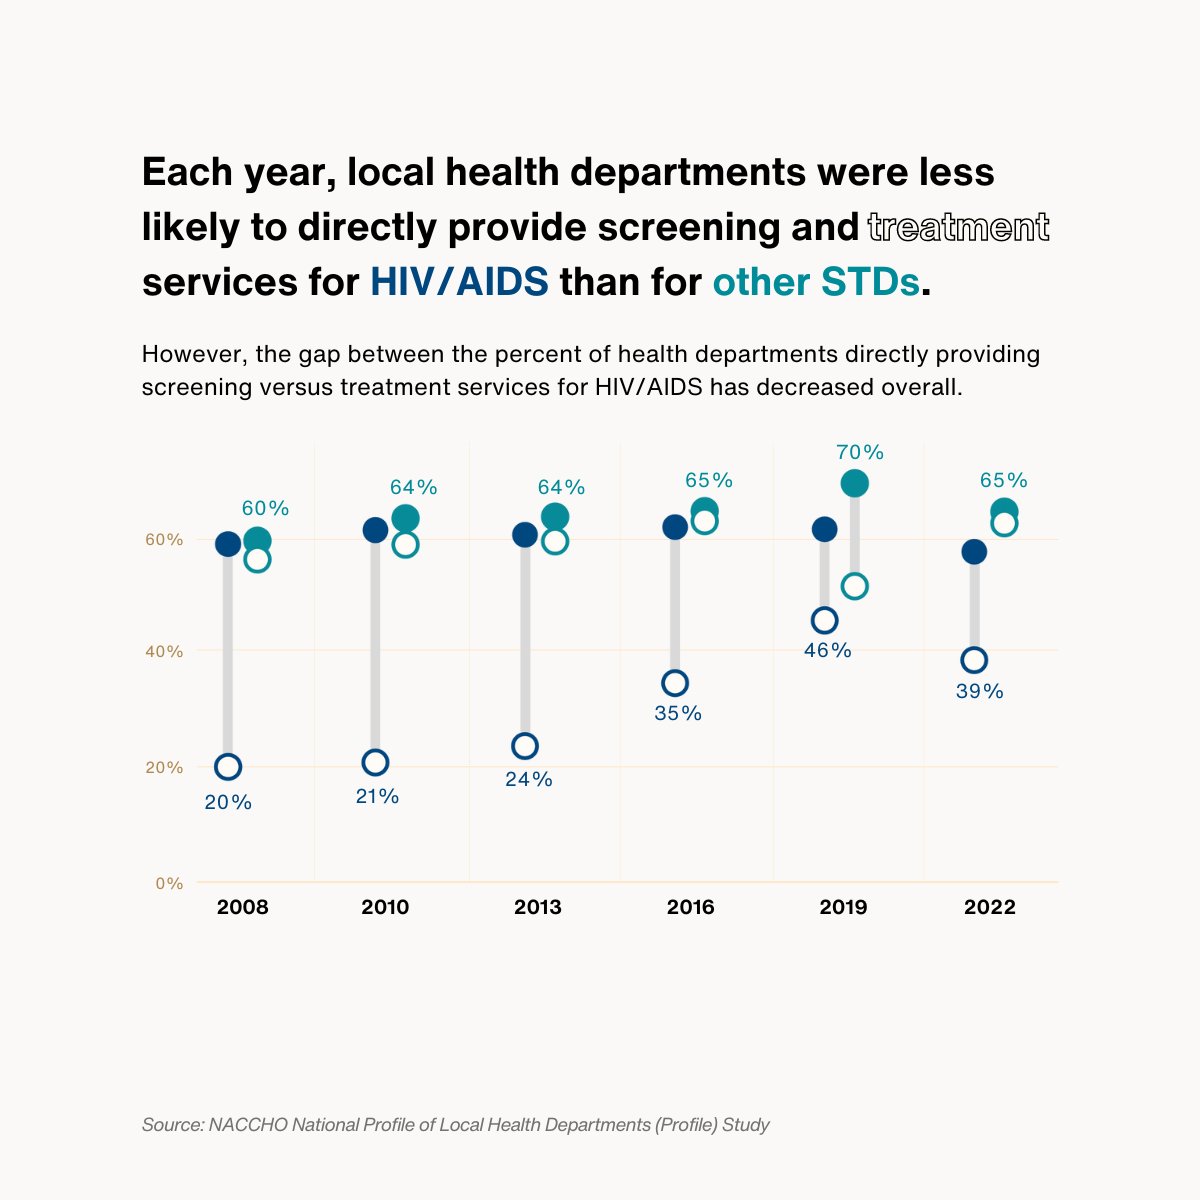 This #STIWeek, check out our data on local health department services for STDs. #NACCHOProfileStudy shows how service provision has changed over the past decade. Follow along on LinkedIn this week as we share more #DataViz highlighting our #STI research: linkedin.com/showcase/nacch….